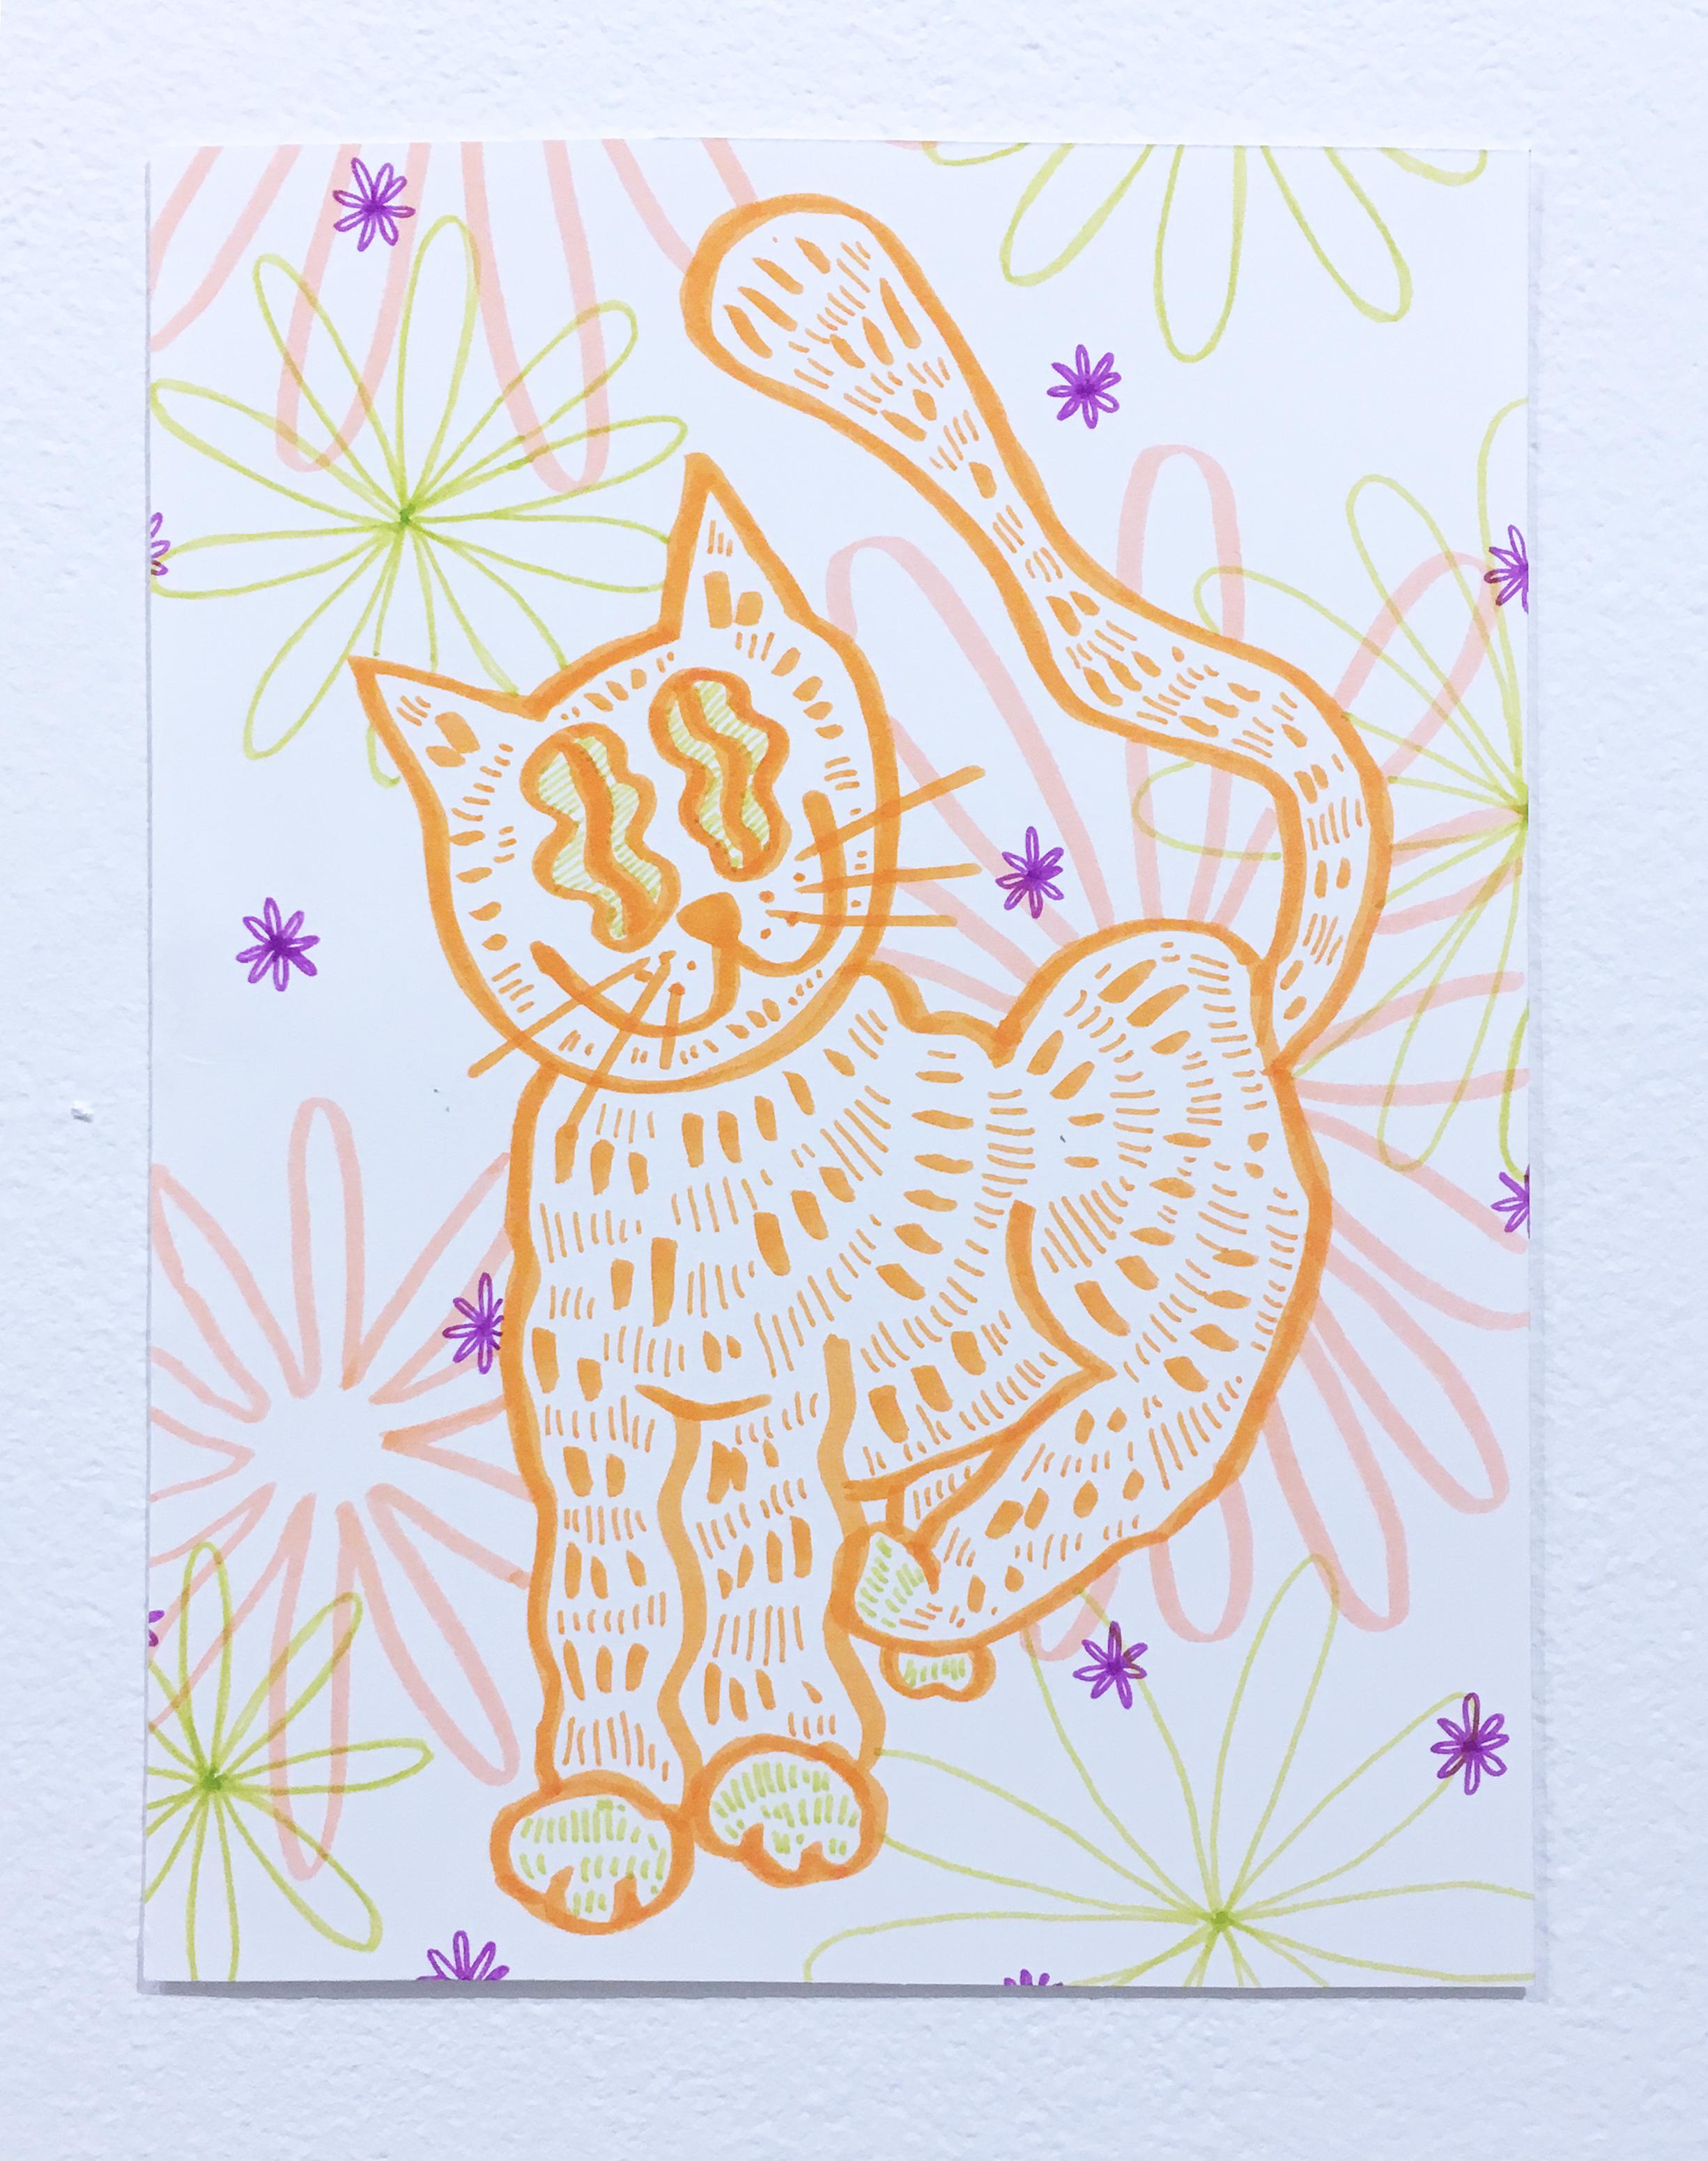 Soft and Fuzzy, Watercolor Paper Drawing, Cat with Flowers, Graphic Wavy Pattern - Art by SarahGrace